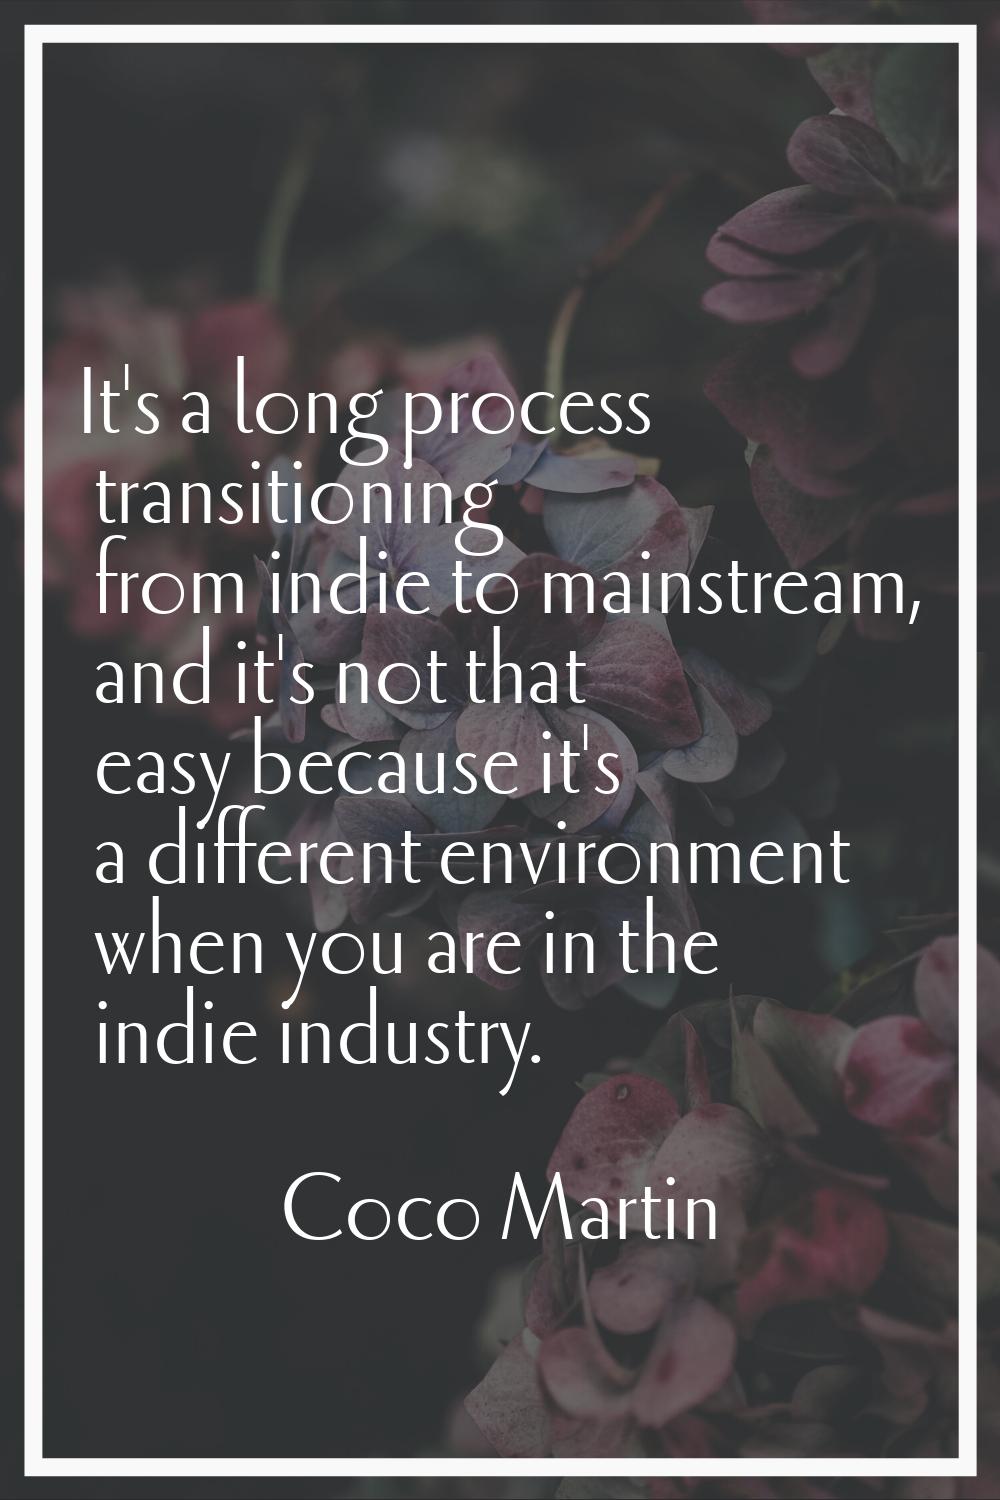 It's a long process transitioning from indie to mainstream, and it's not that easy because it's a d